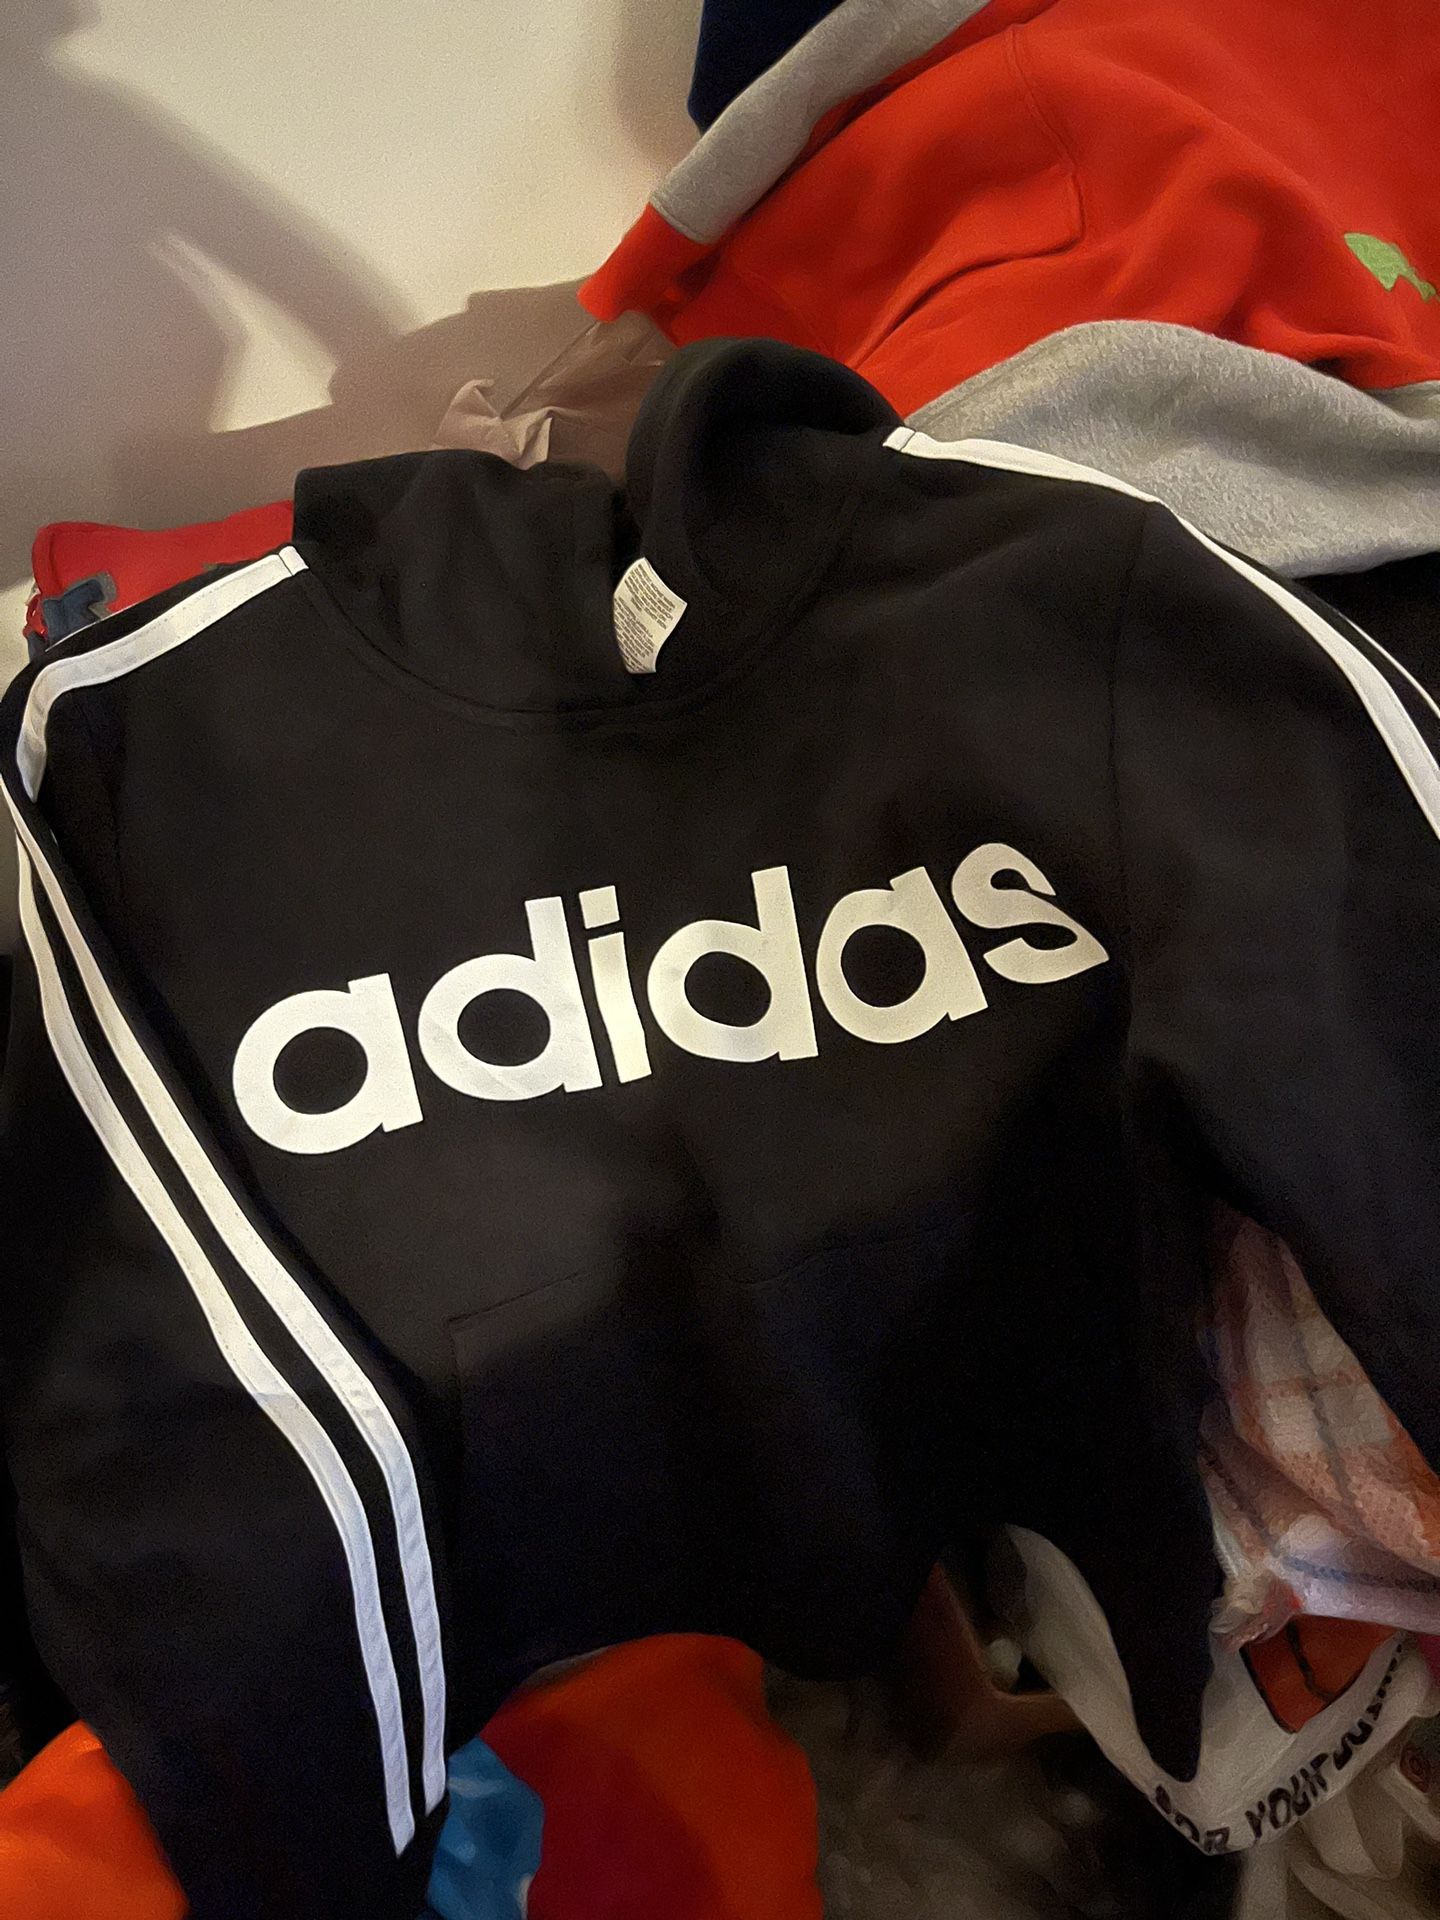 Hoodies Adidas, D.K.N.Y Nikes, ( 7/8,10/12,14,16,(2 Orange and Navy Vest size 5/6 and 7/8) some stuff are sold.. what's  size you'll looking for? 👇🏽